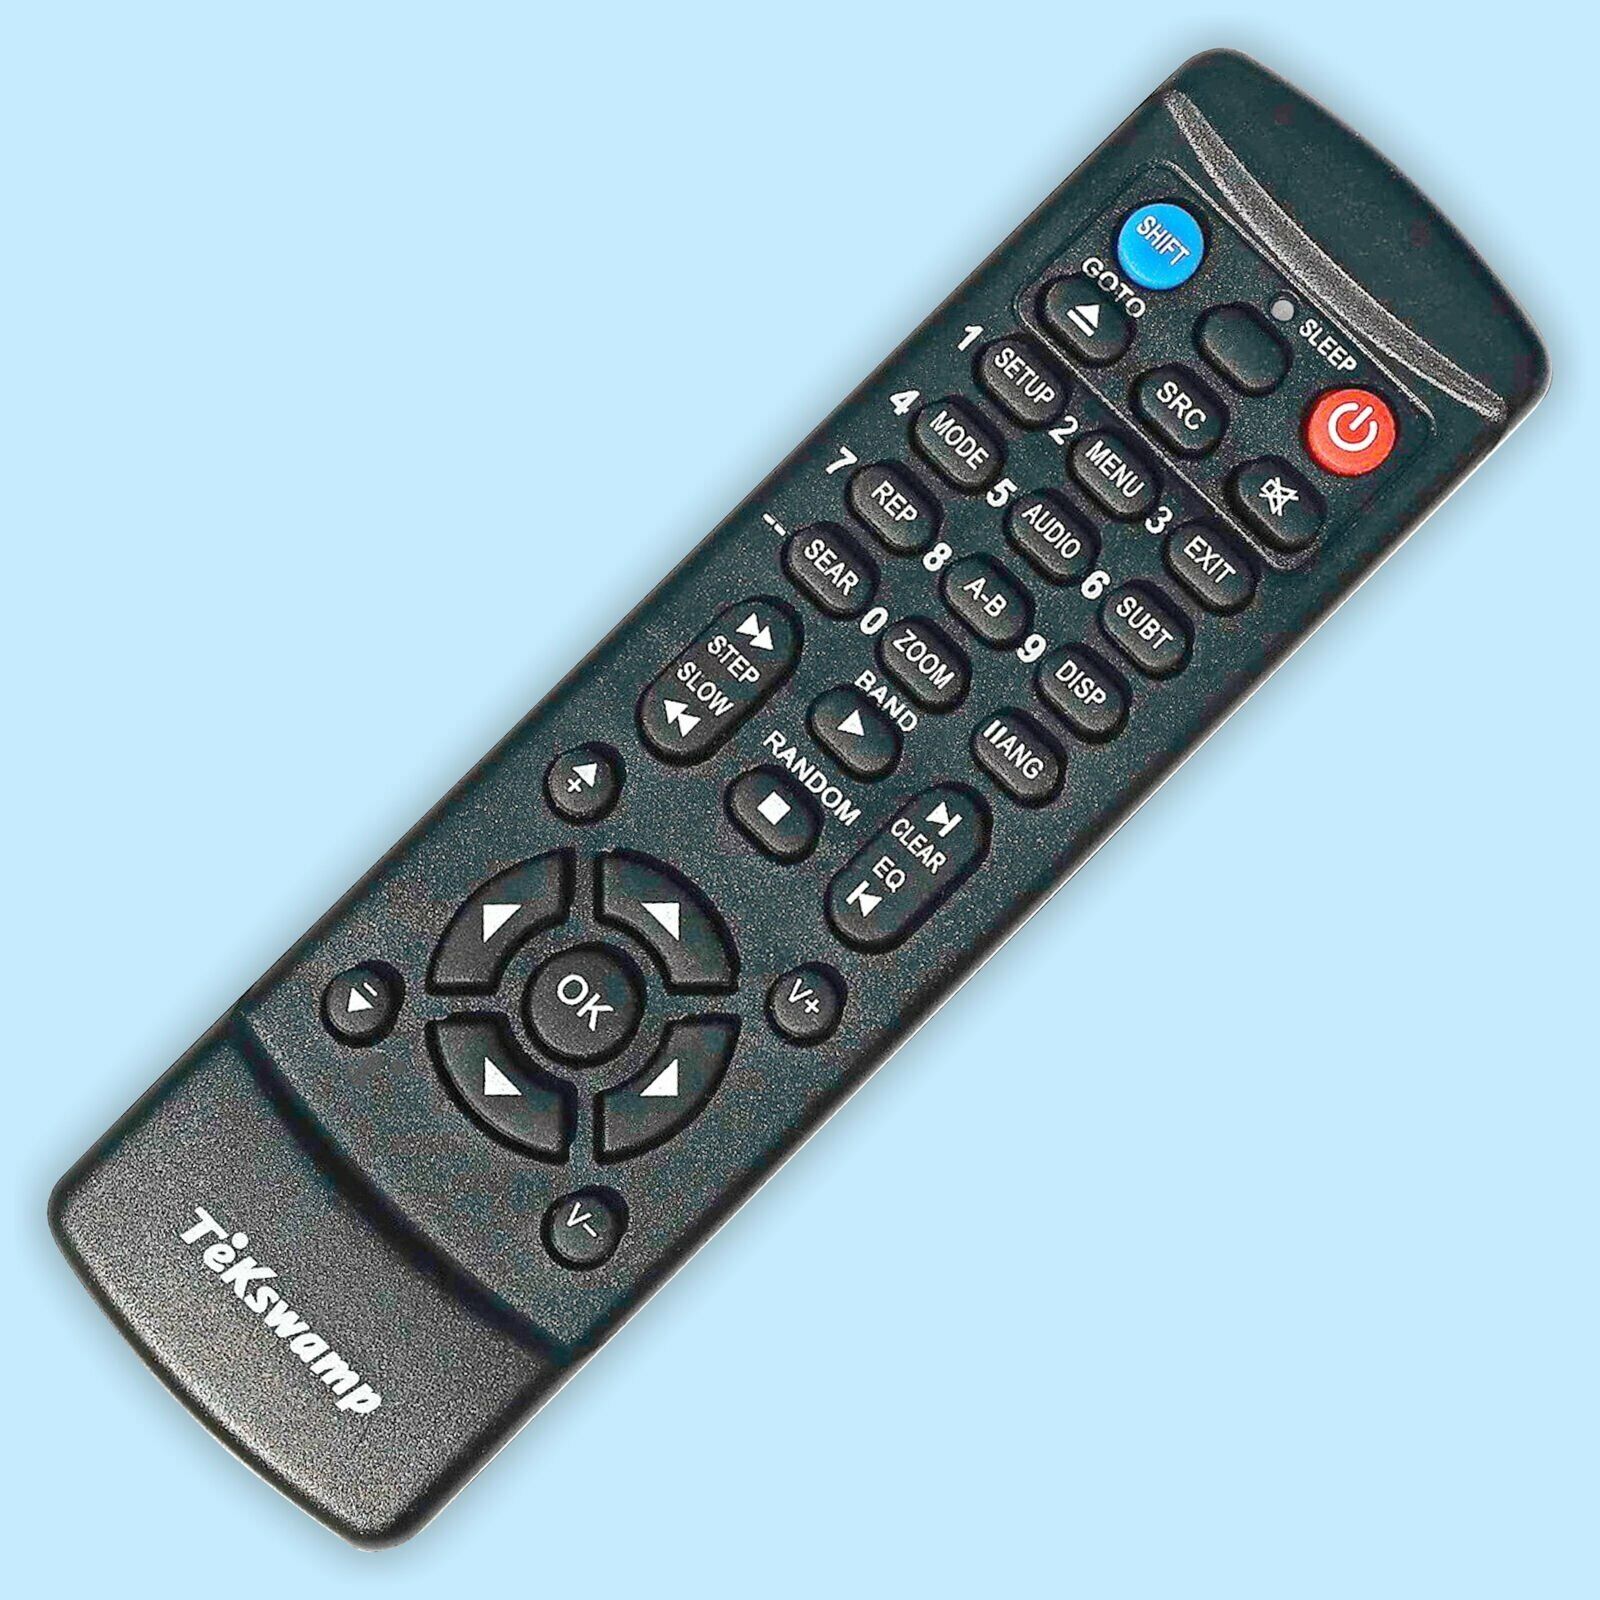 TeKswamp Remote Control for LG BH7130C BH7130CB BB5530A BH9220BW BH9540TW - image 1 of 7